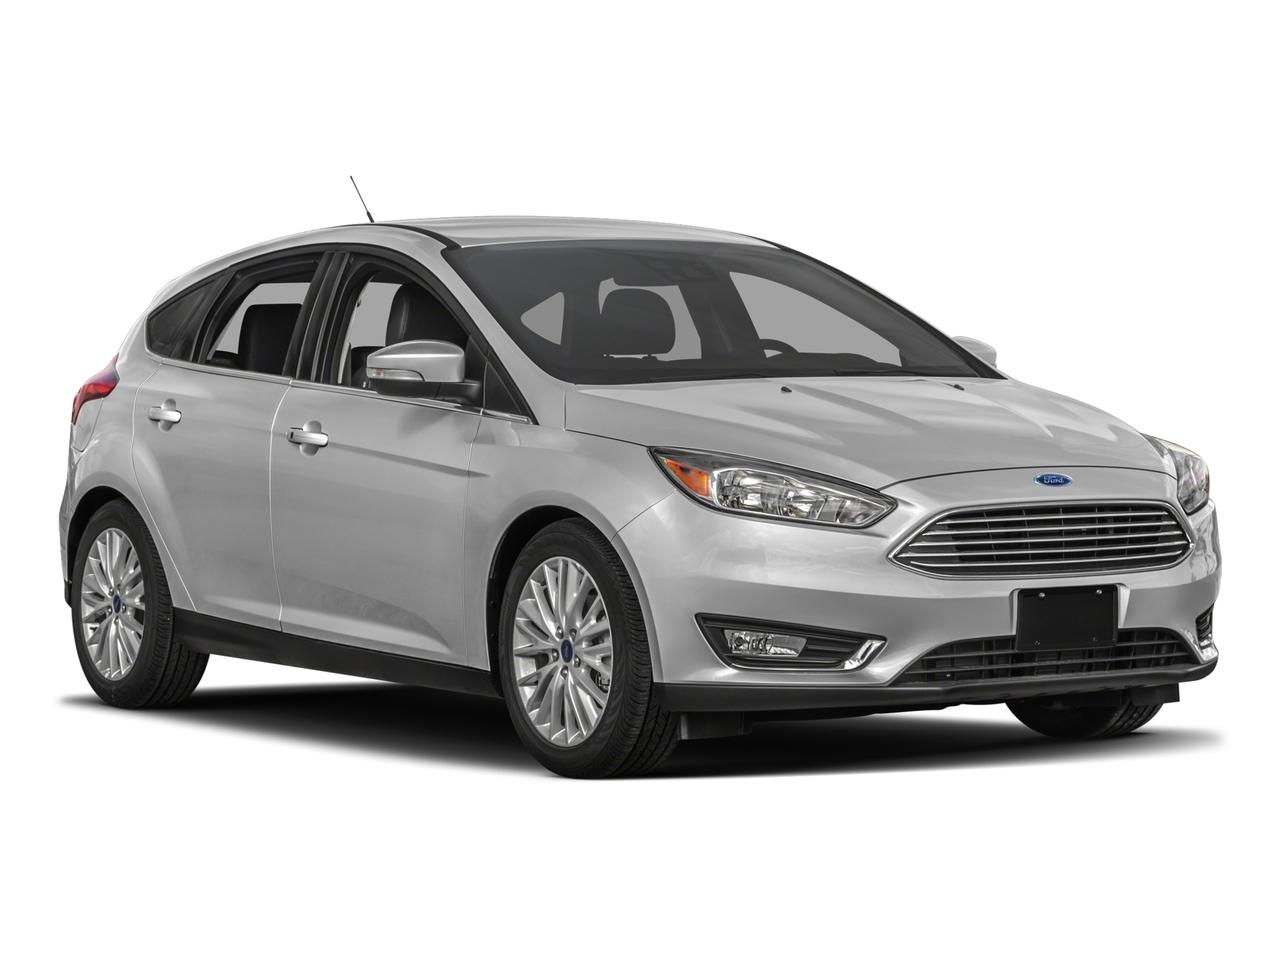 2017 Ford Focus Vehicle Photo in Panama City, FL 32401